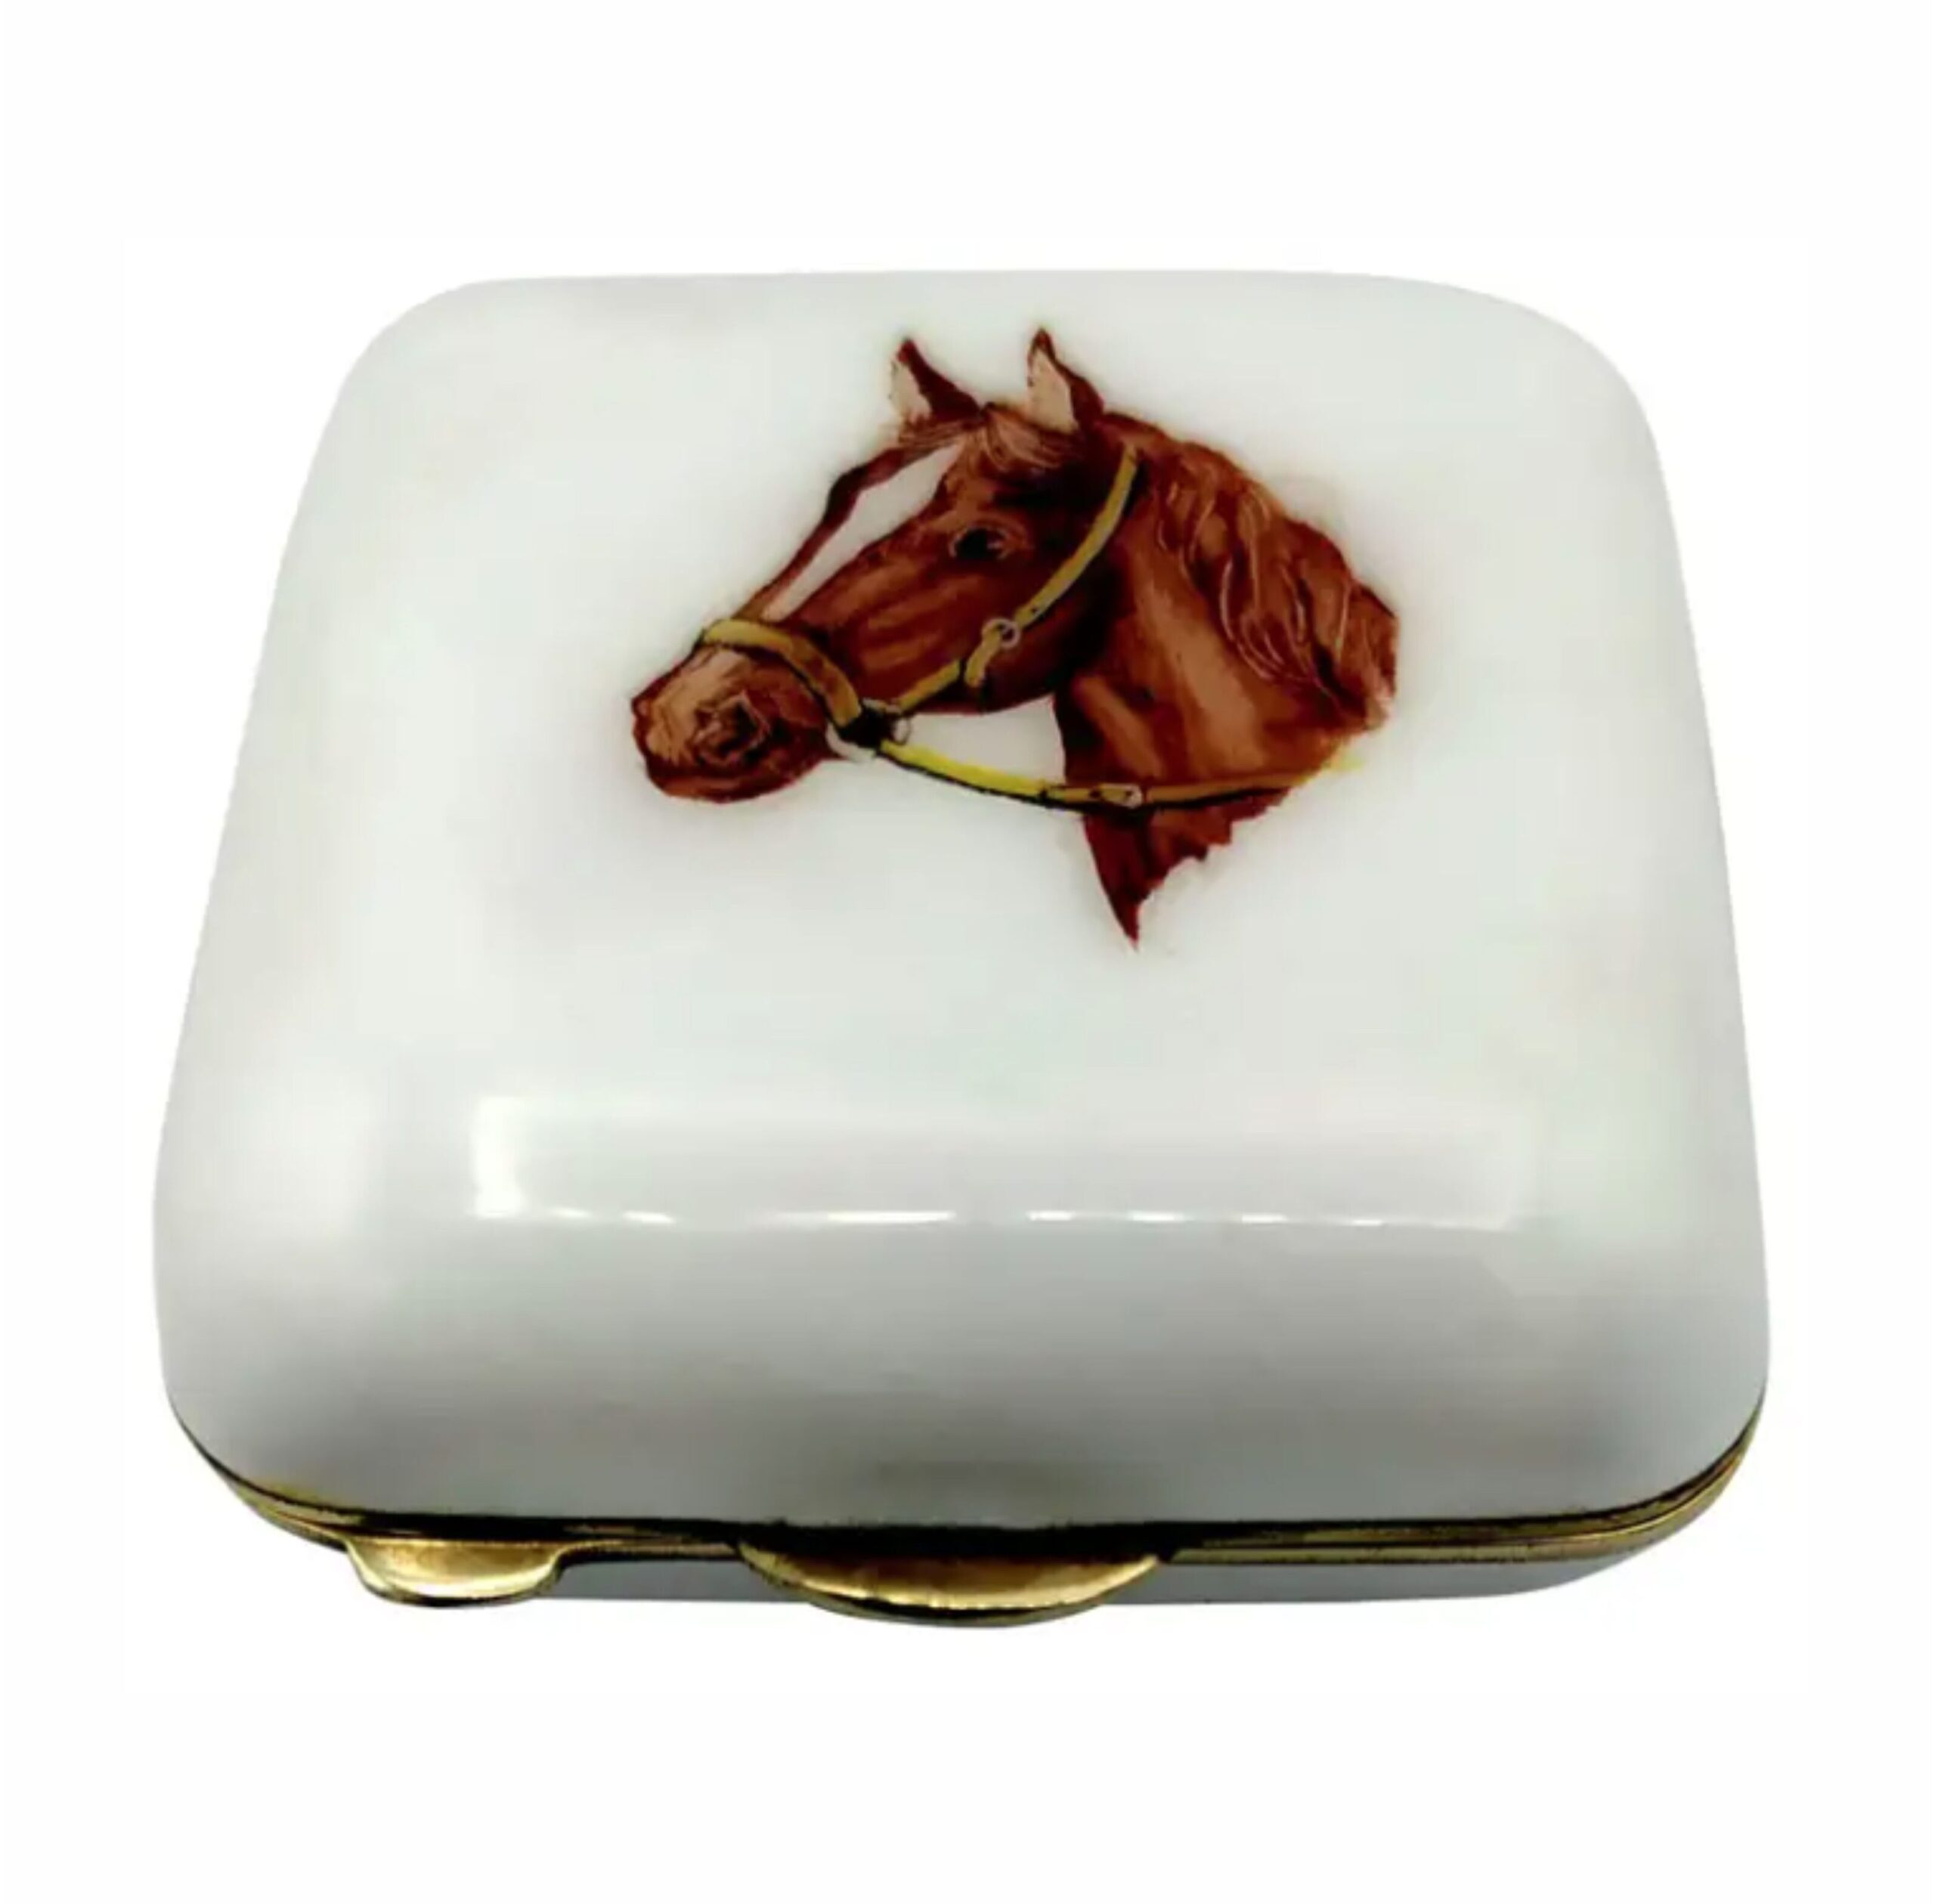 Gucci silver products by Salimbeni. Pill box with head of horse.  Not with Gucci Mark
